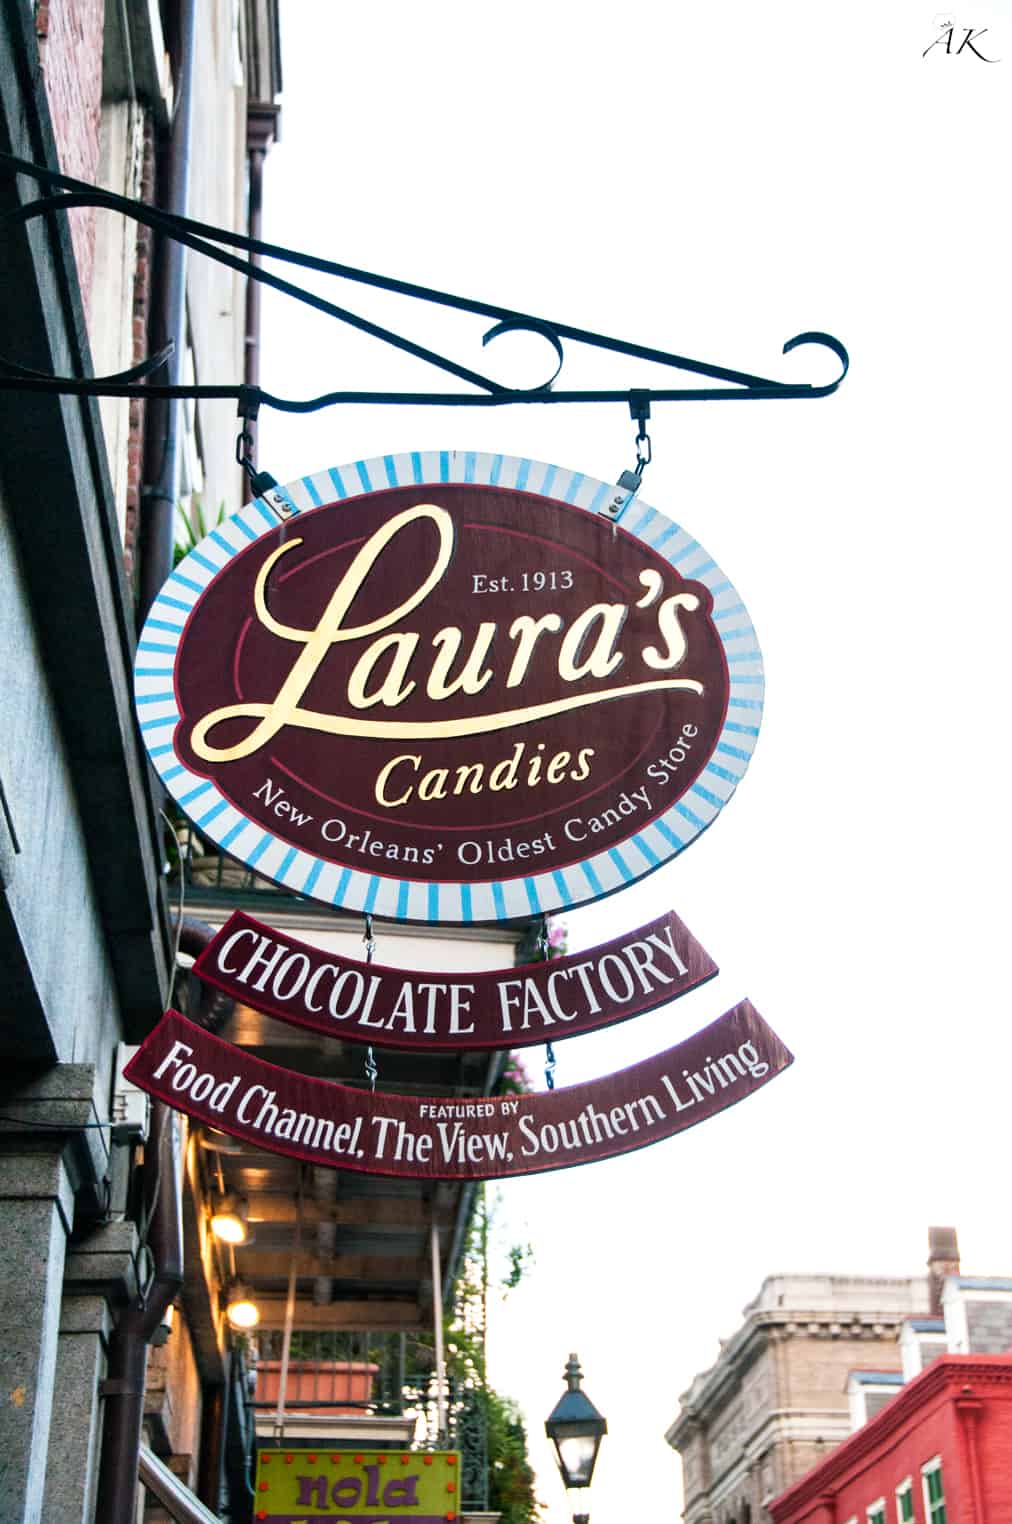 Laura's Candies New Orleans 